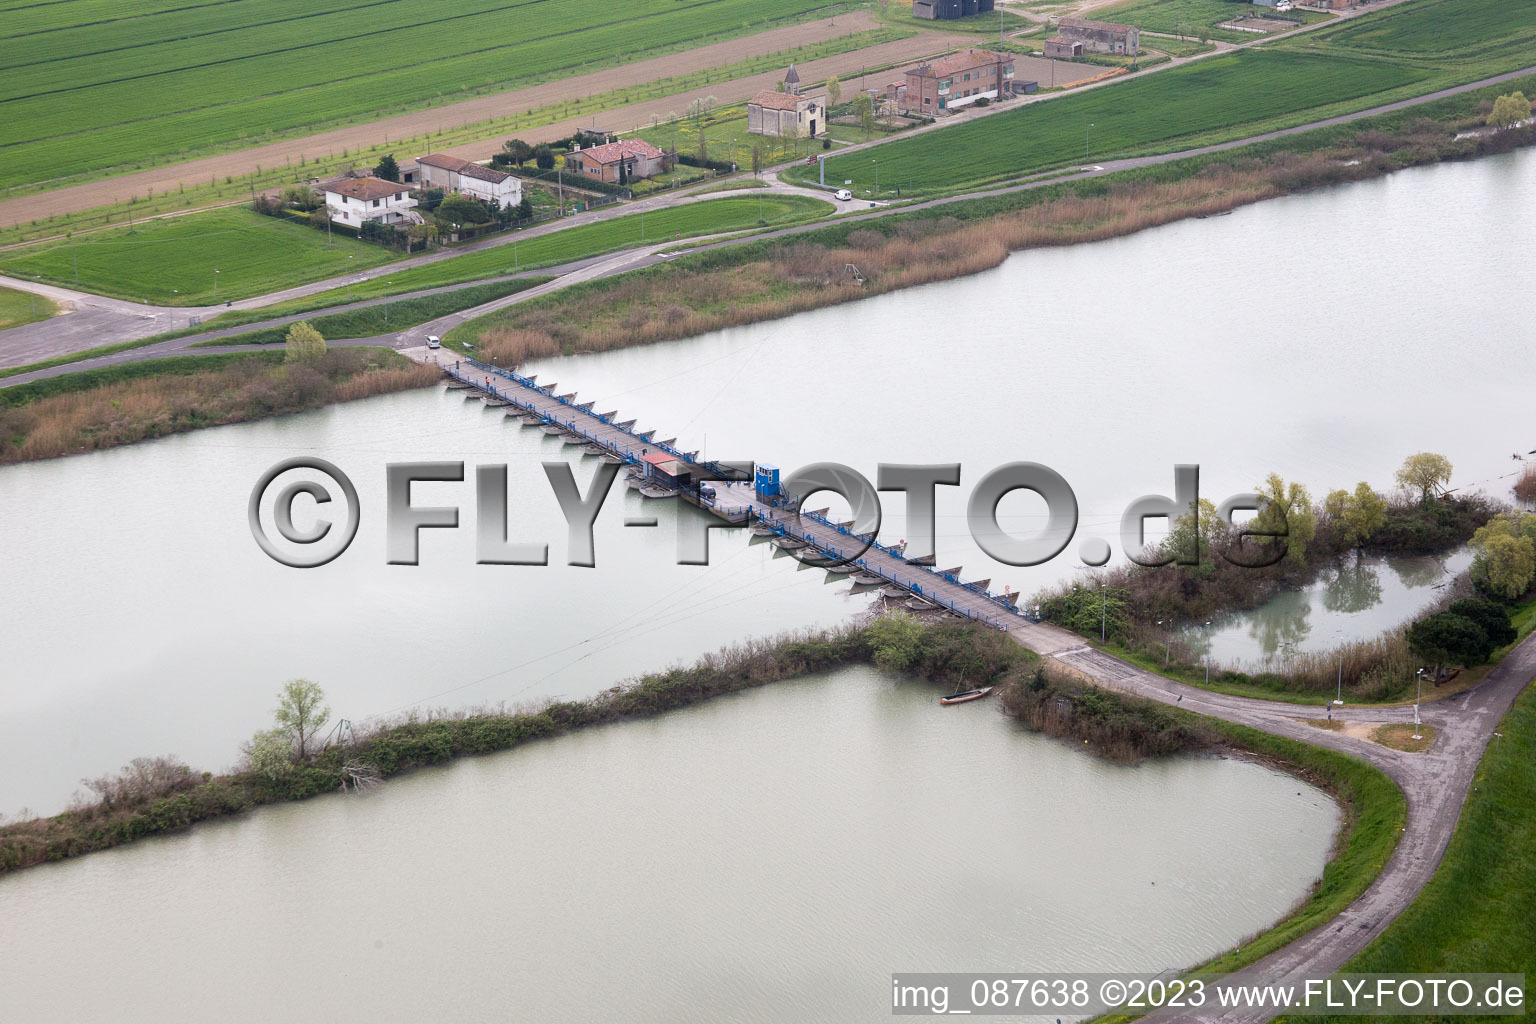 Aerial photograpy of Gorino in the state Veneto, Italy